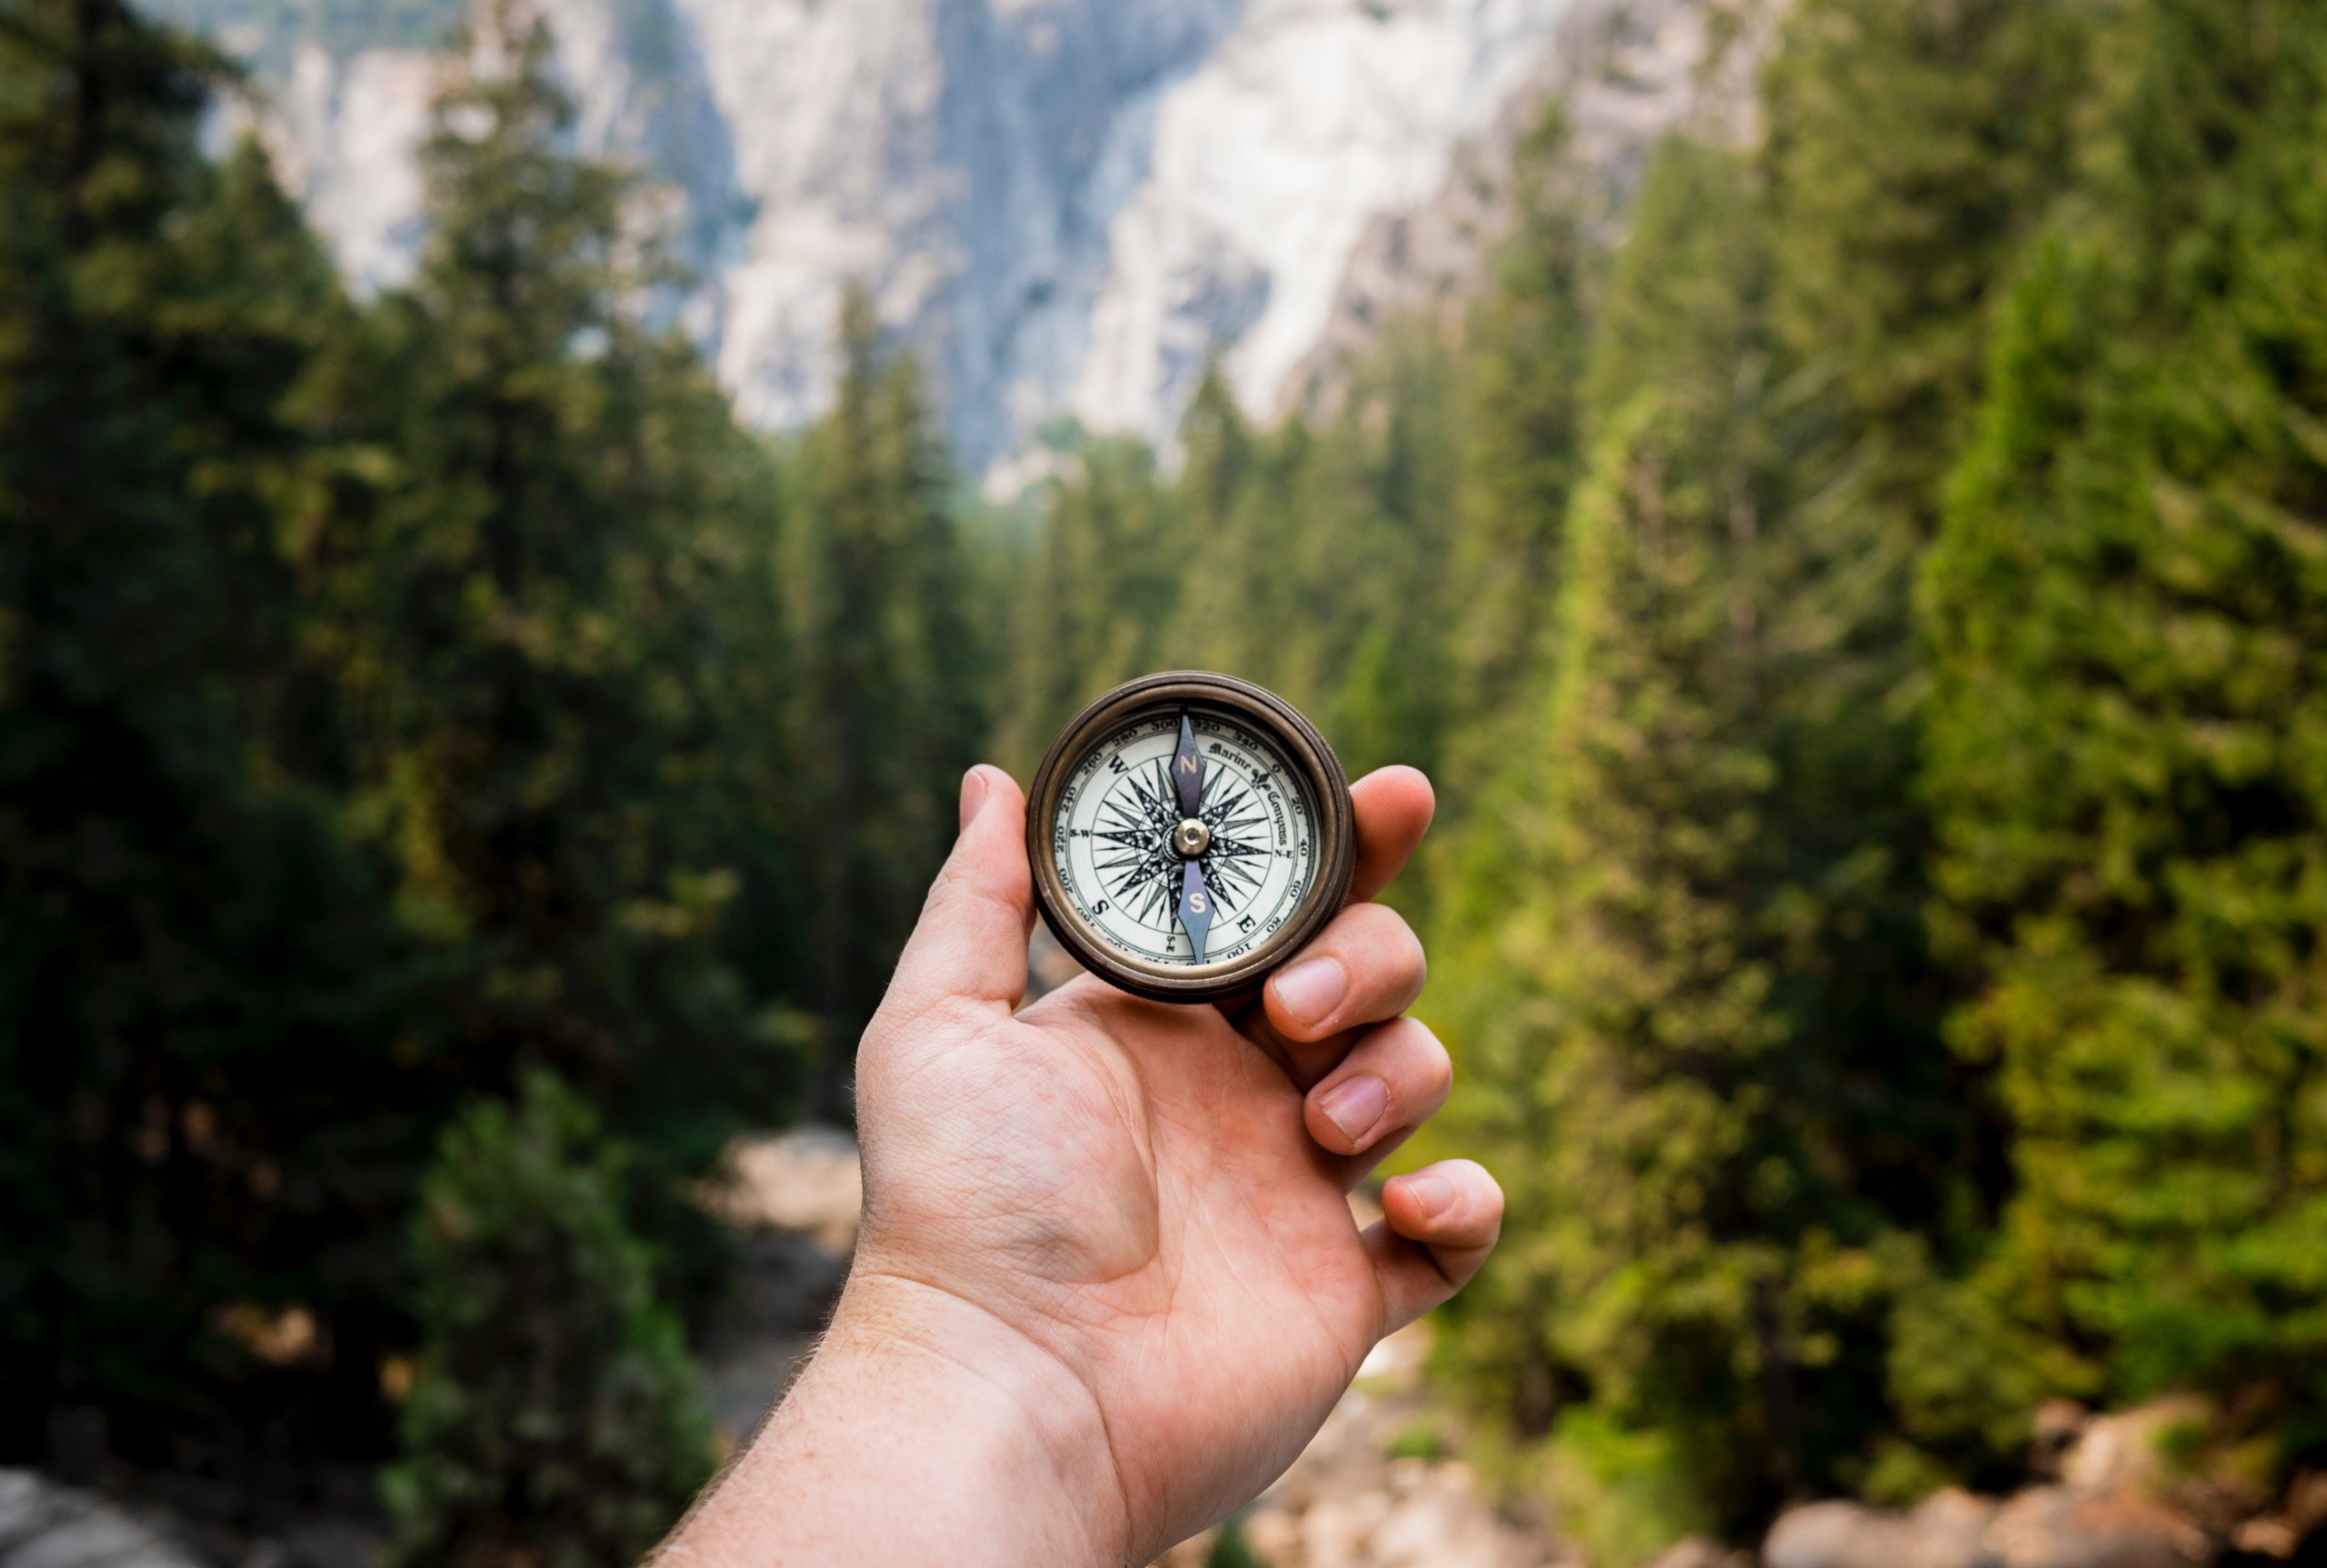 human hand holding a compass against a forest background